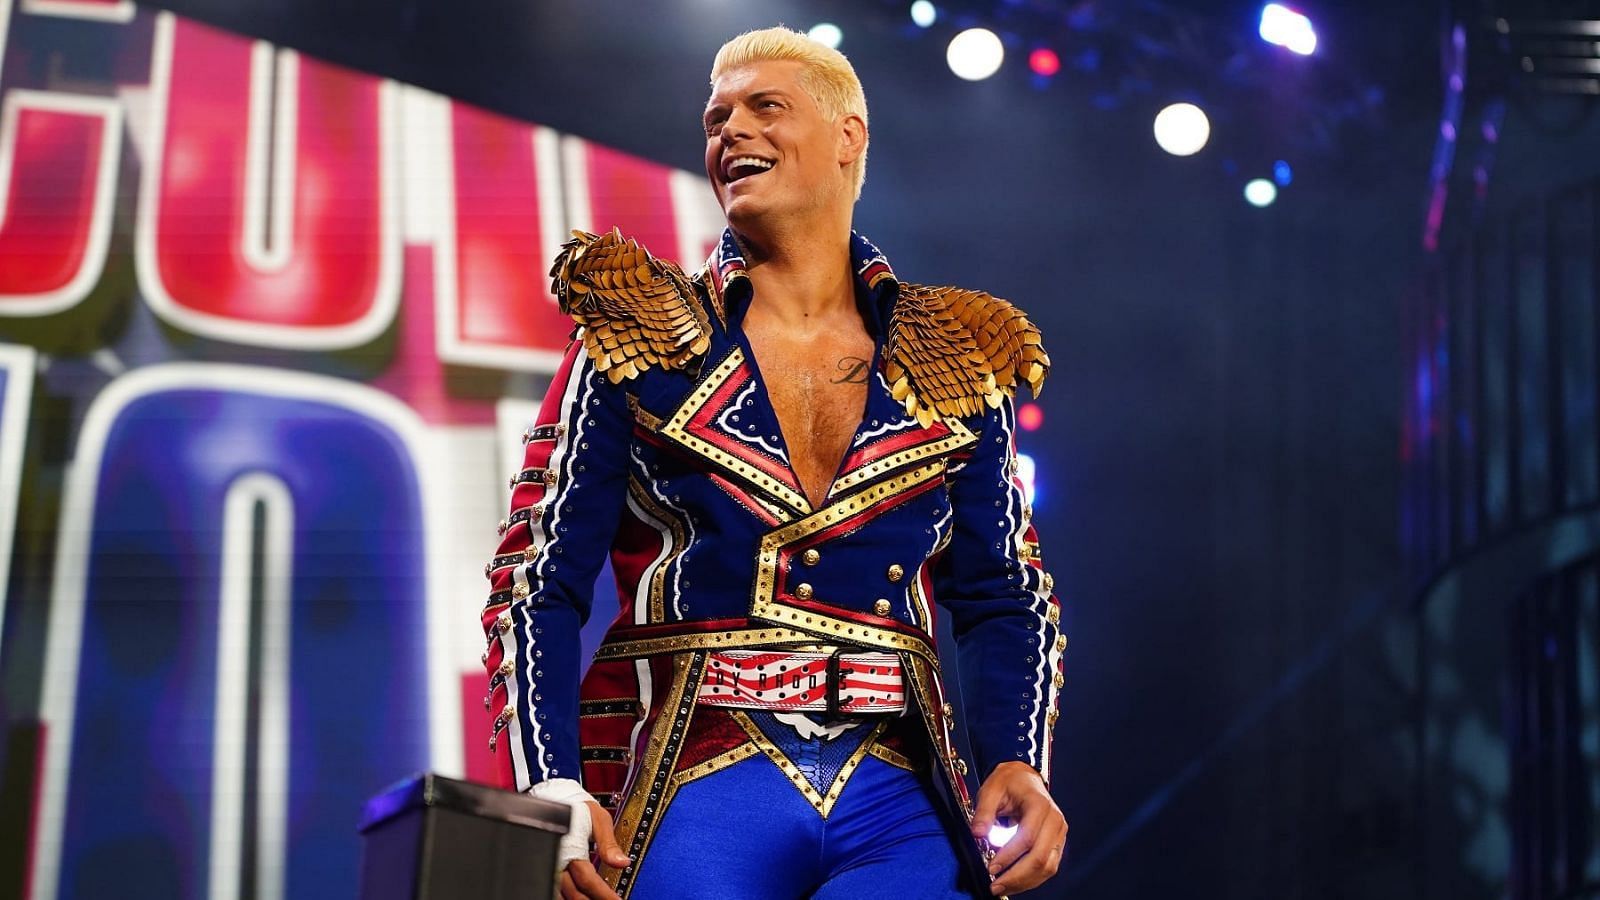 Cody Rhodes is being booed by fans during his AEW appearances